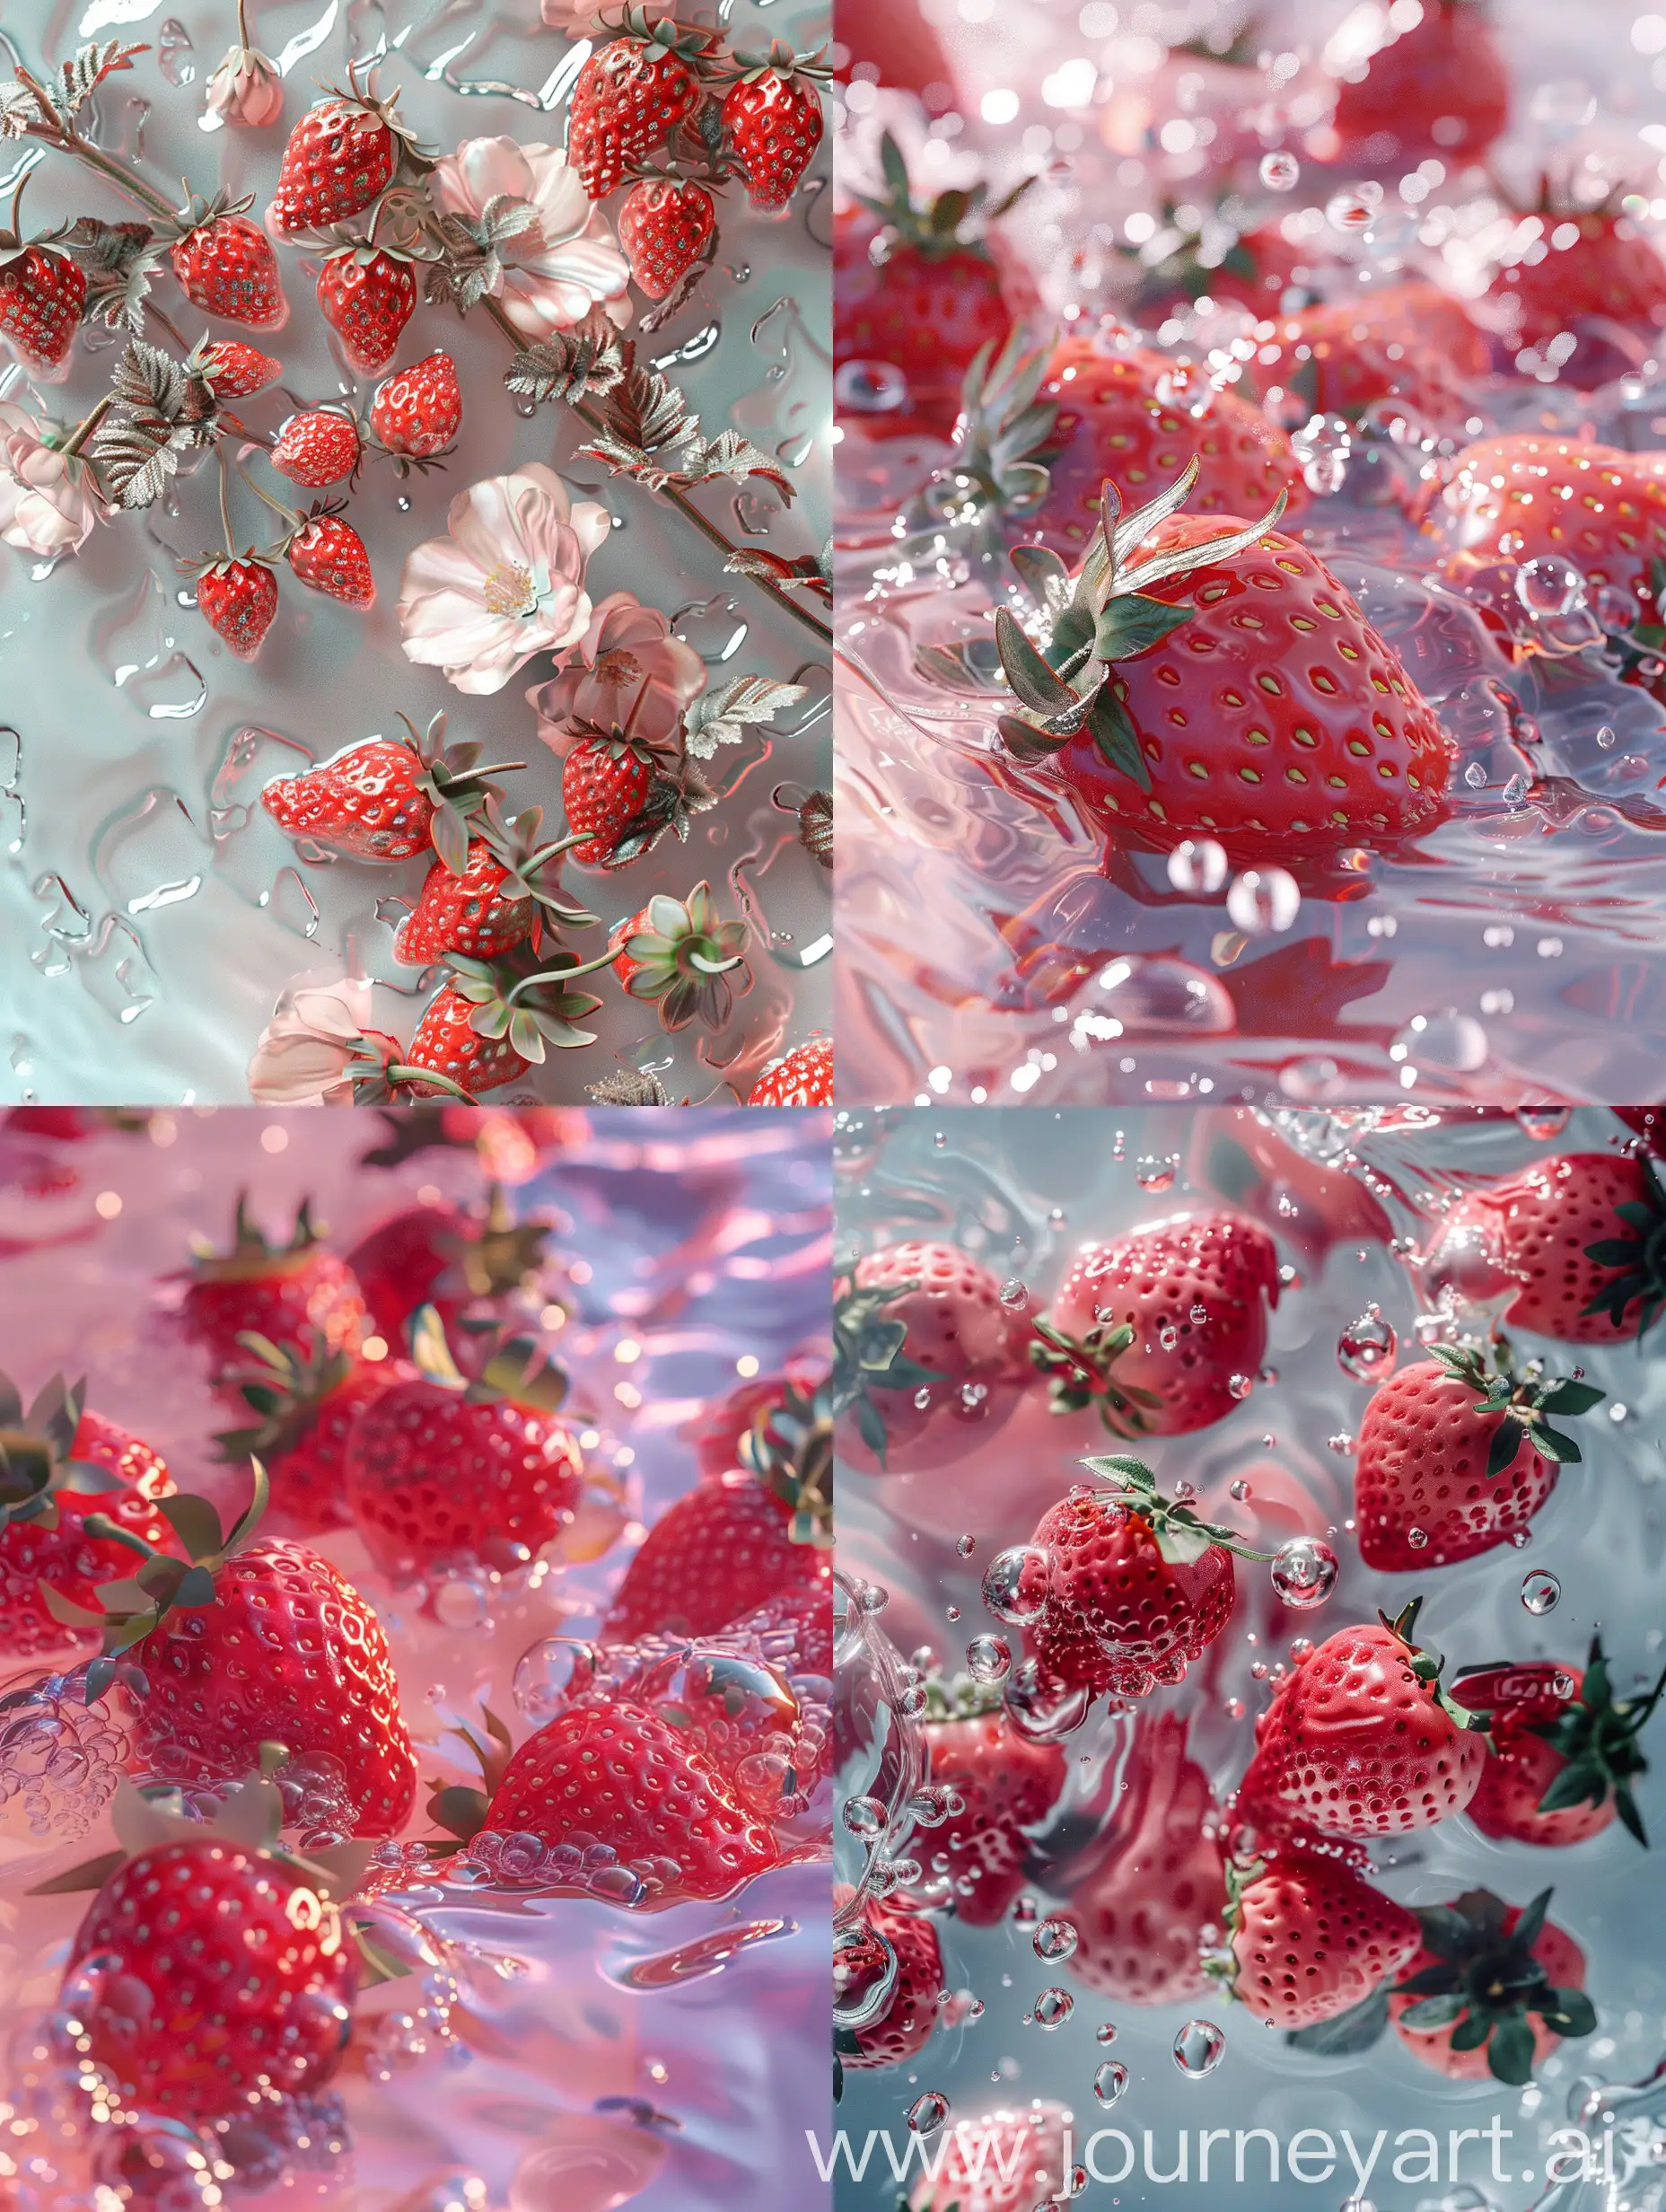 a photo of strawberries and water, in the stylof light silver and light pink, anime aesthetic.playfully intricate, berrypunk, gorgeous color32k uhd, karol bak --v 6.0 --ar 3:4